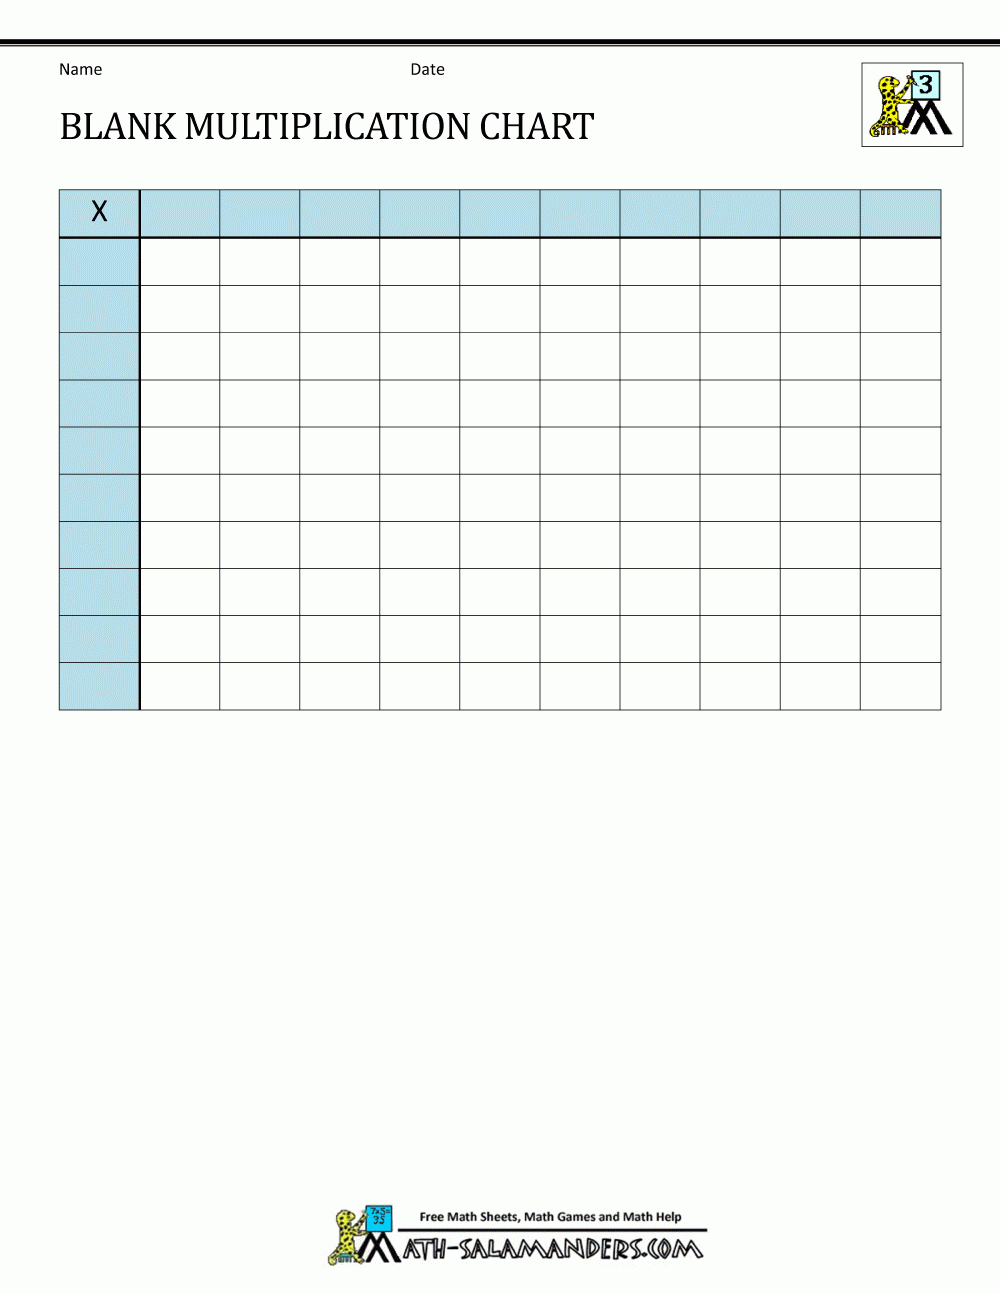 Blank Multiplication Chart Up To 10X10 throughout Printable Multiplication Blank Chart